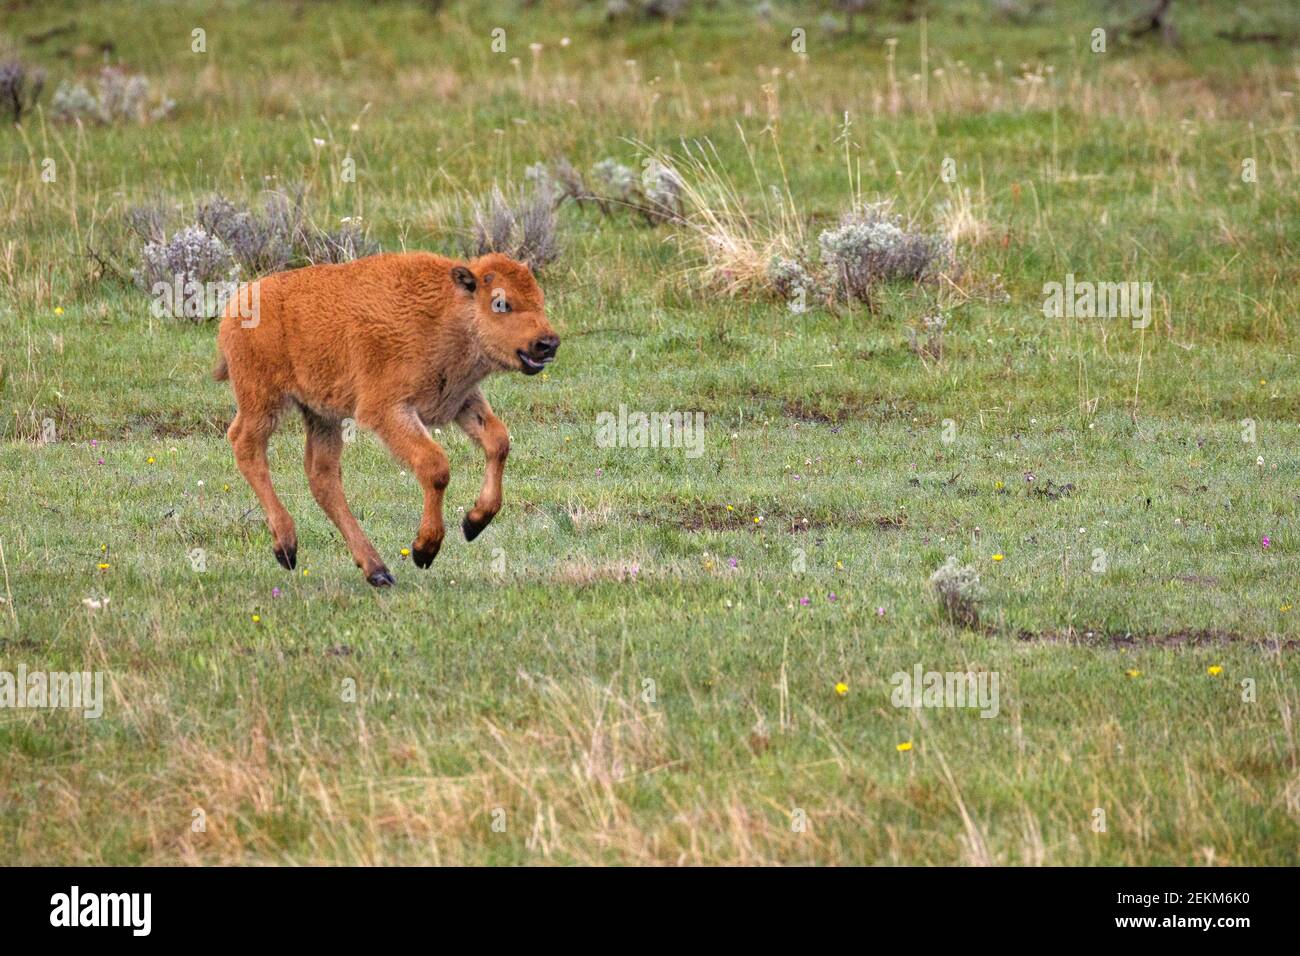 Yellowstone National Park, WY: American Bison (Bison bison),  calf also known as 'red dogs' running through the grass in the Lamar Valley Stock Photo